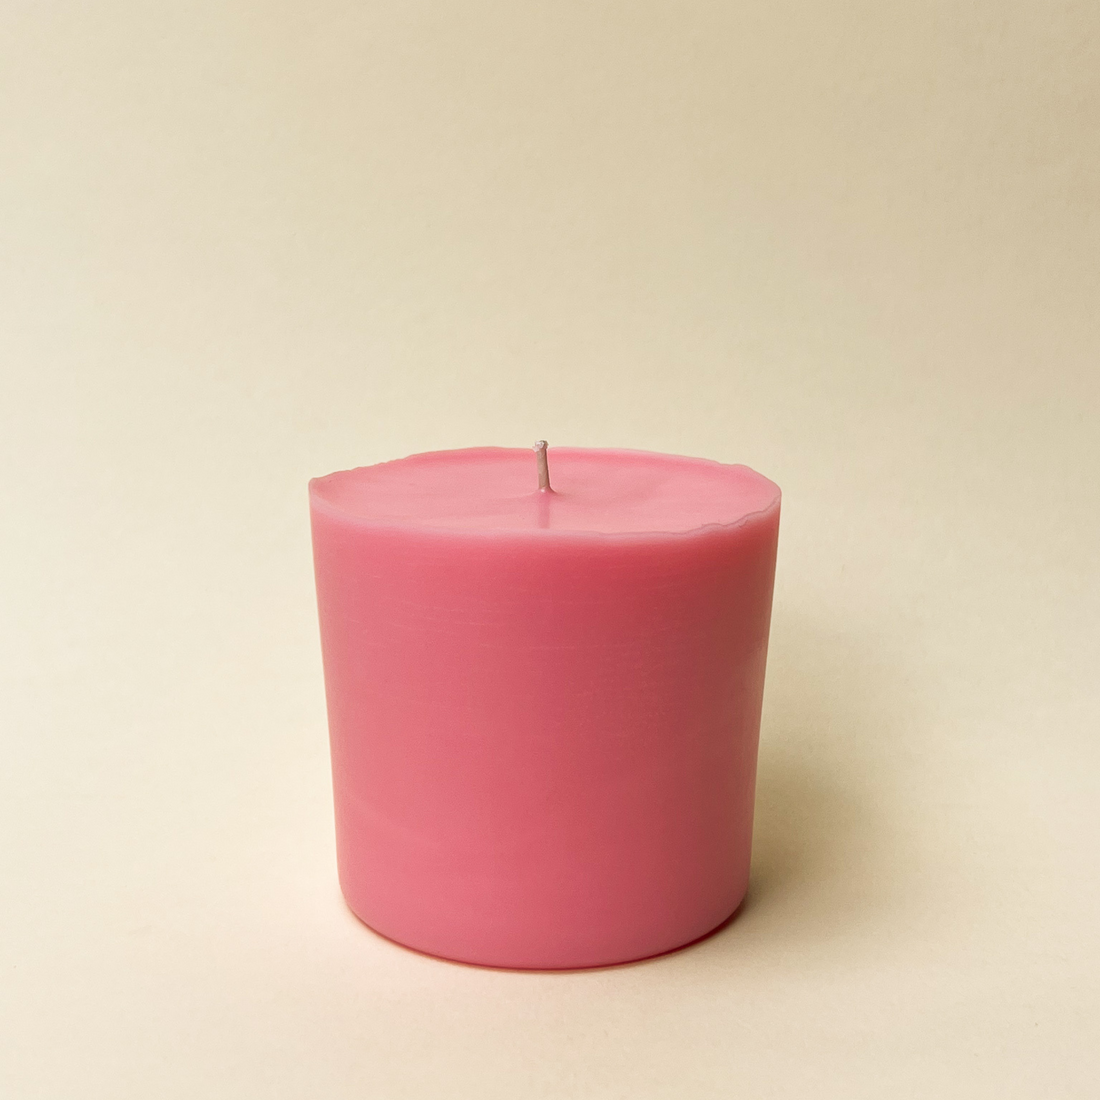 Yuno's "Fresh Roses" candle refill